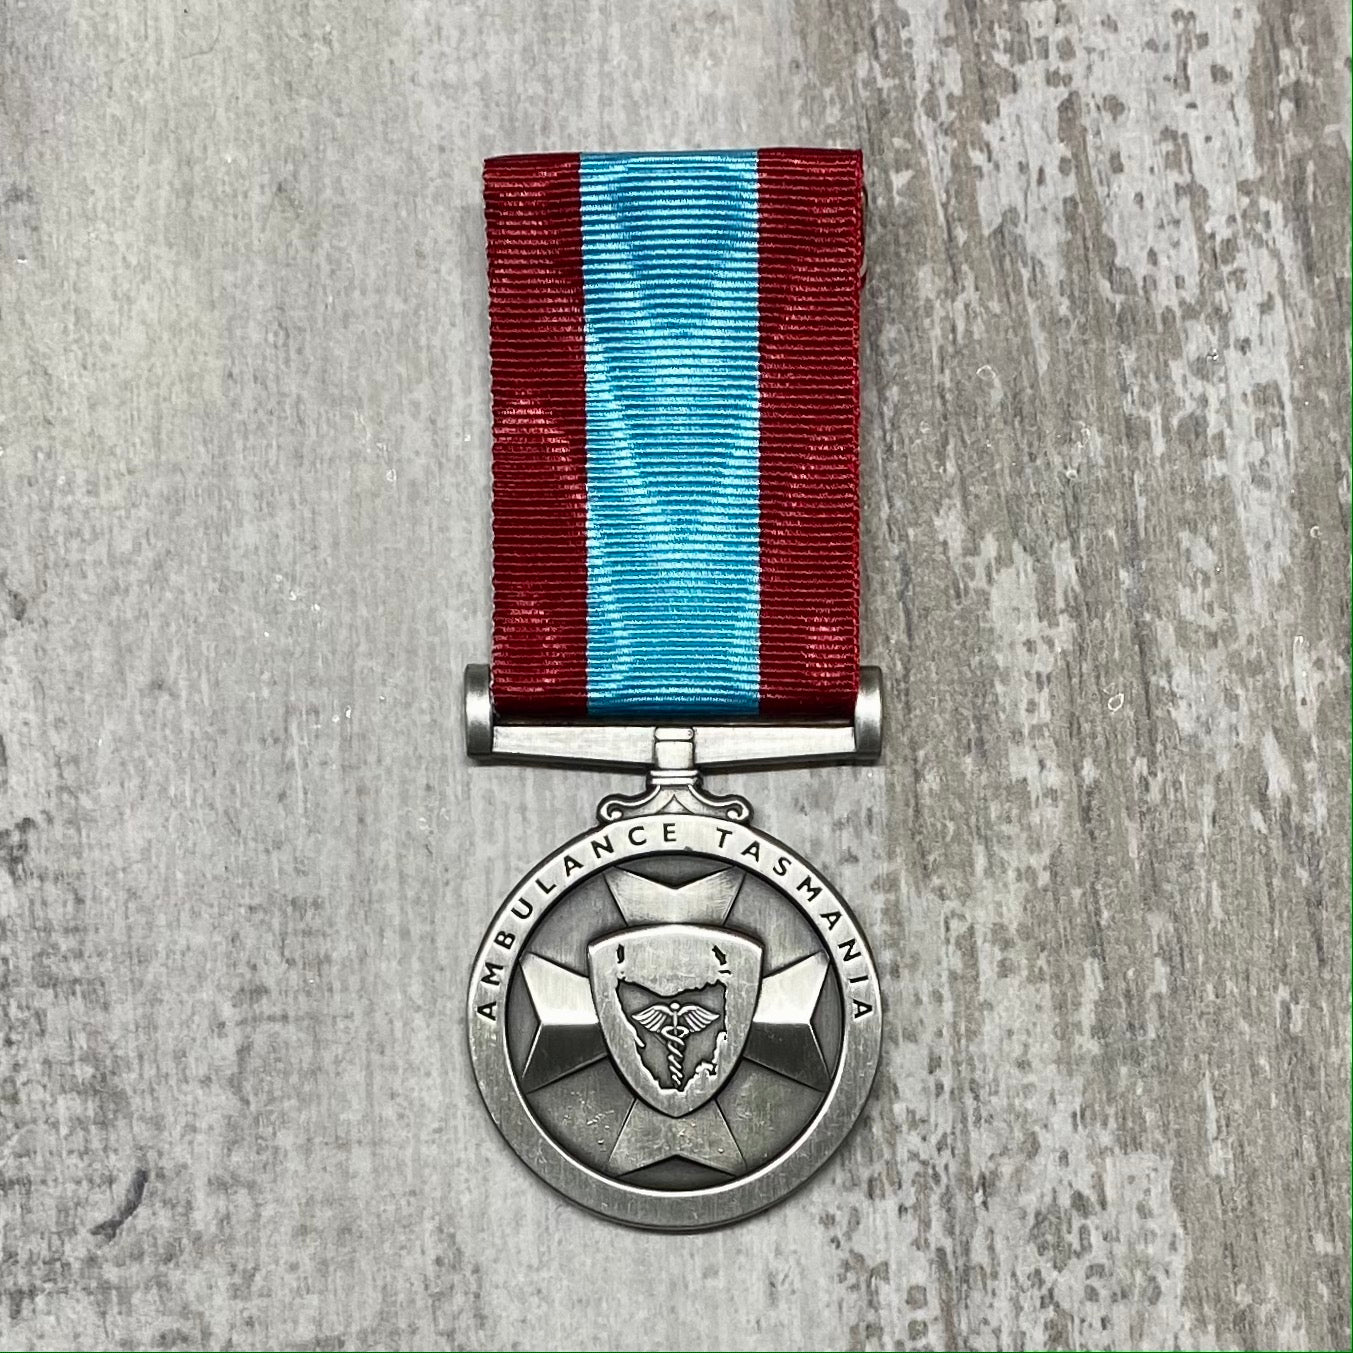 Ambulance Tasmania - Long Service & Recognition Medal - Foxhole Medals